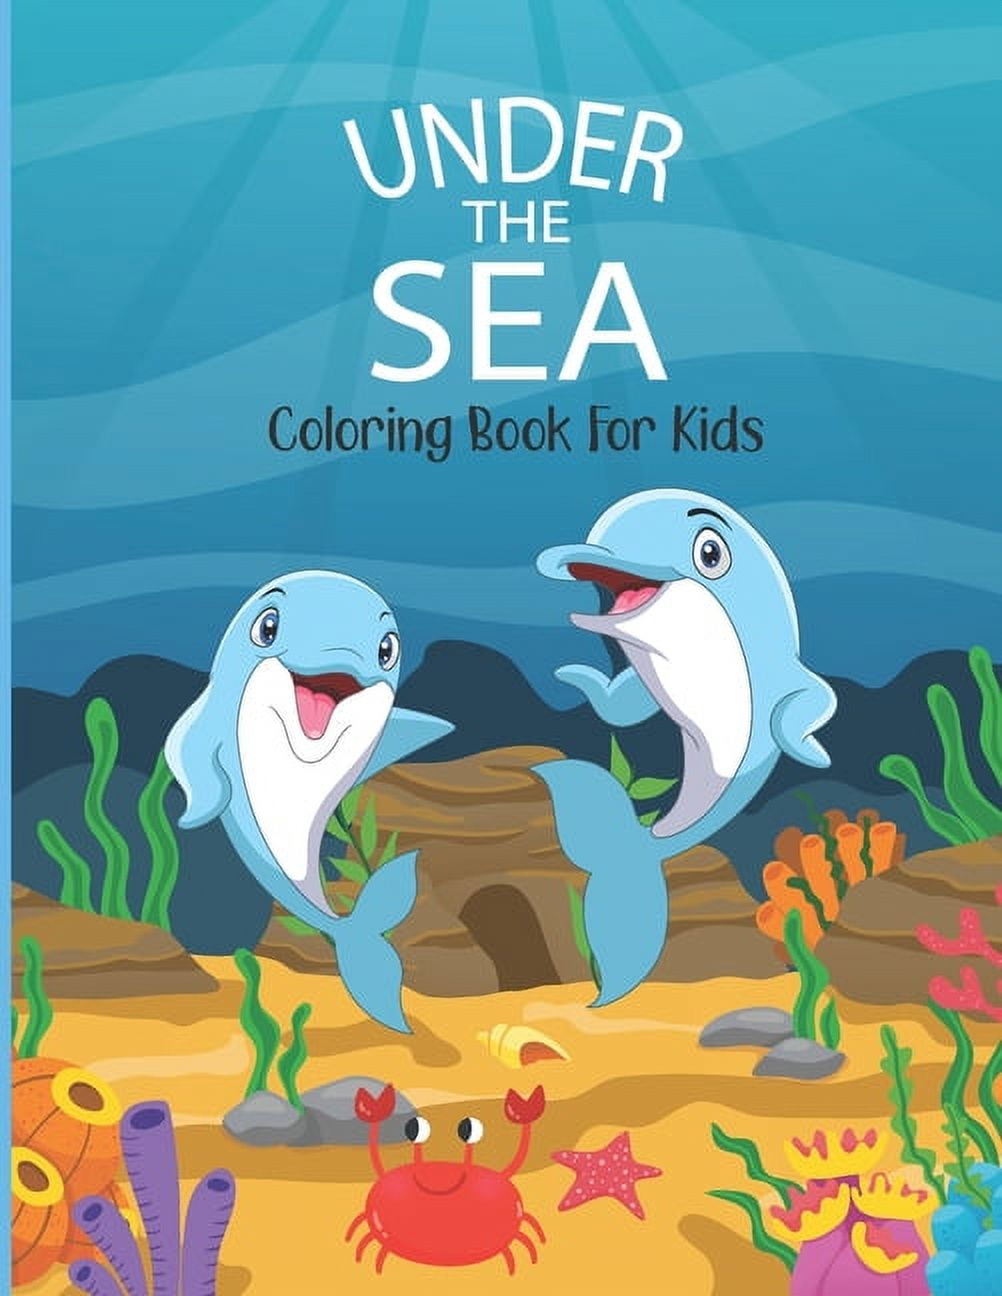 Under the Sea: How to Draw Books for Kids with Dolphins, Mermaids, and Ocean Animals [Book]